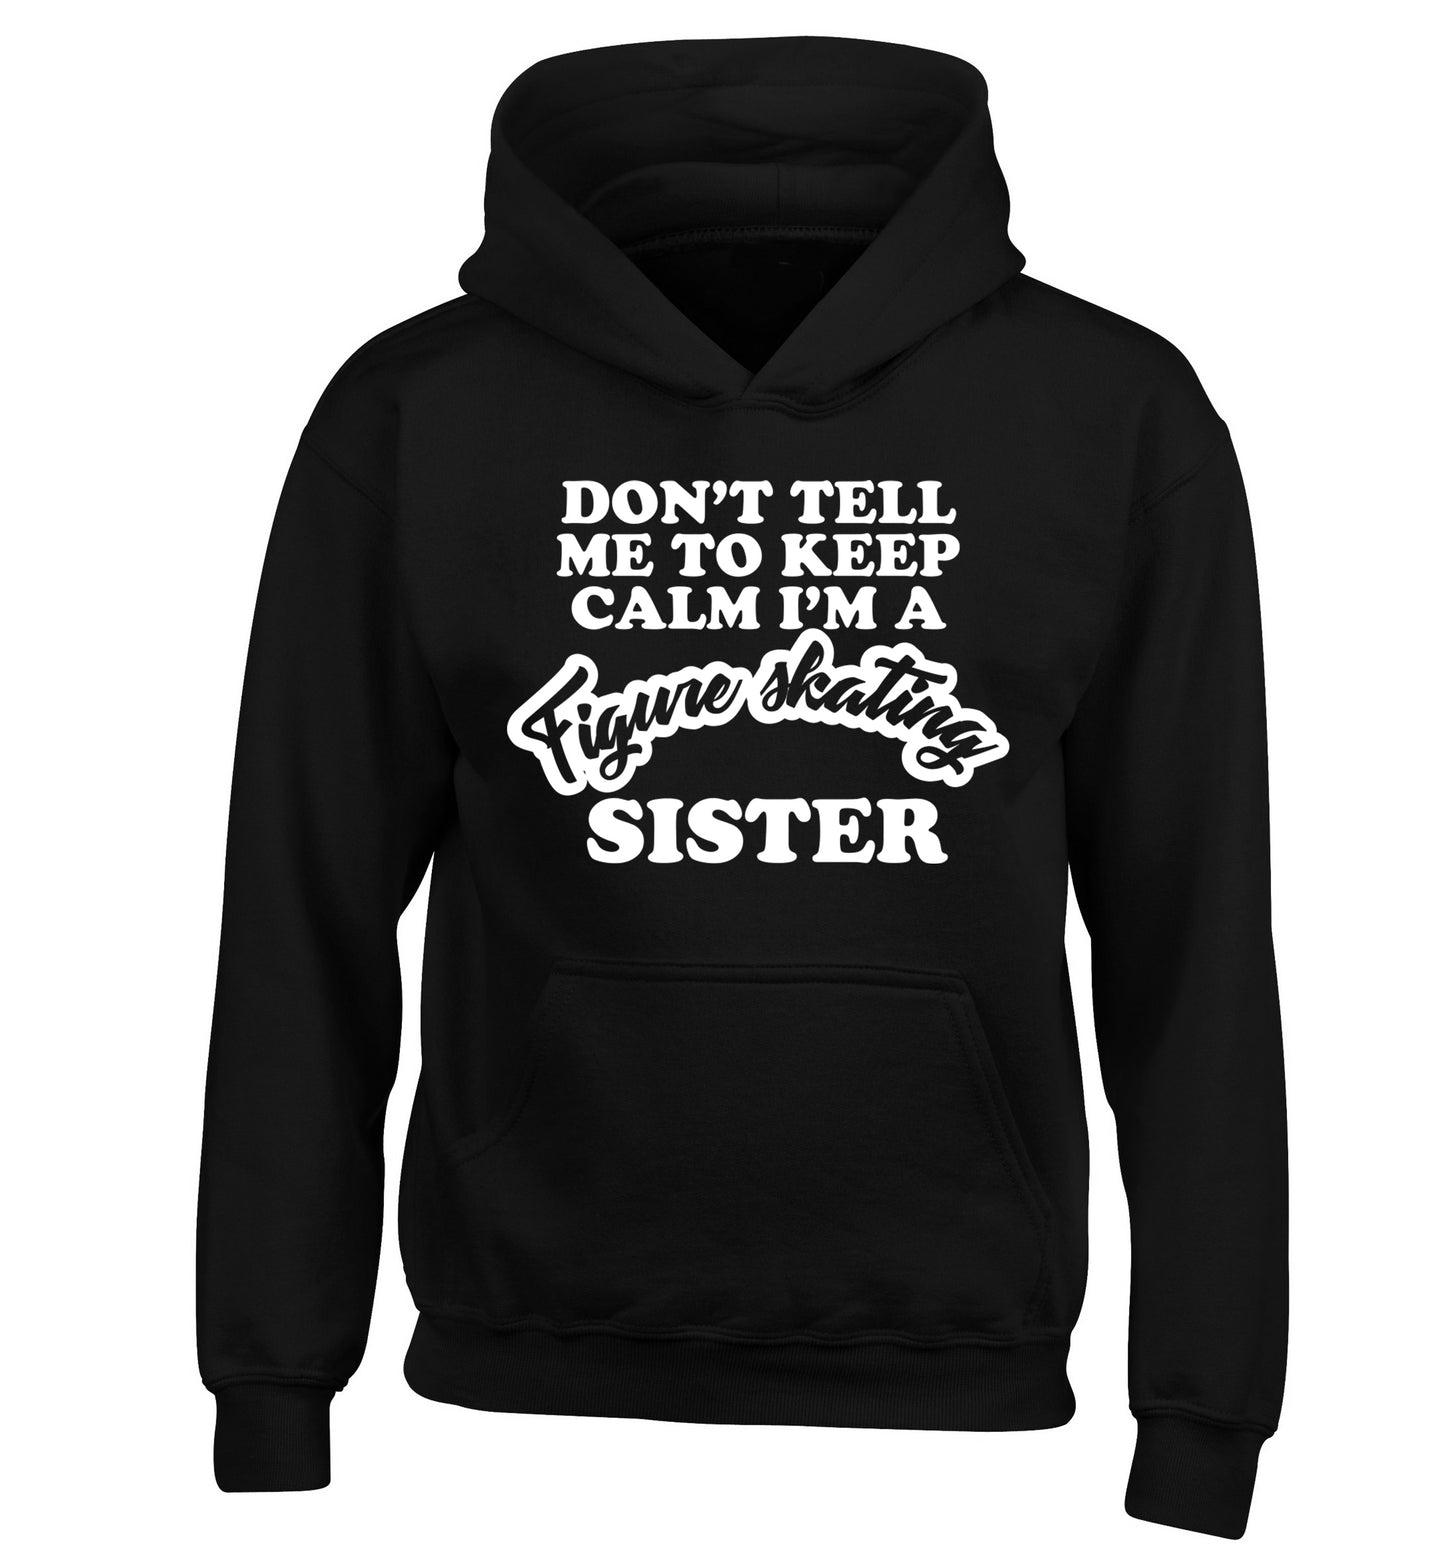 Don't tell me to keep calm I'm a figure skating sister children's black hoodie 12-14 Years